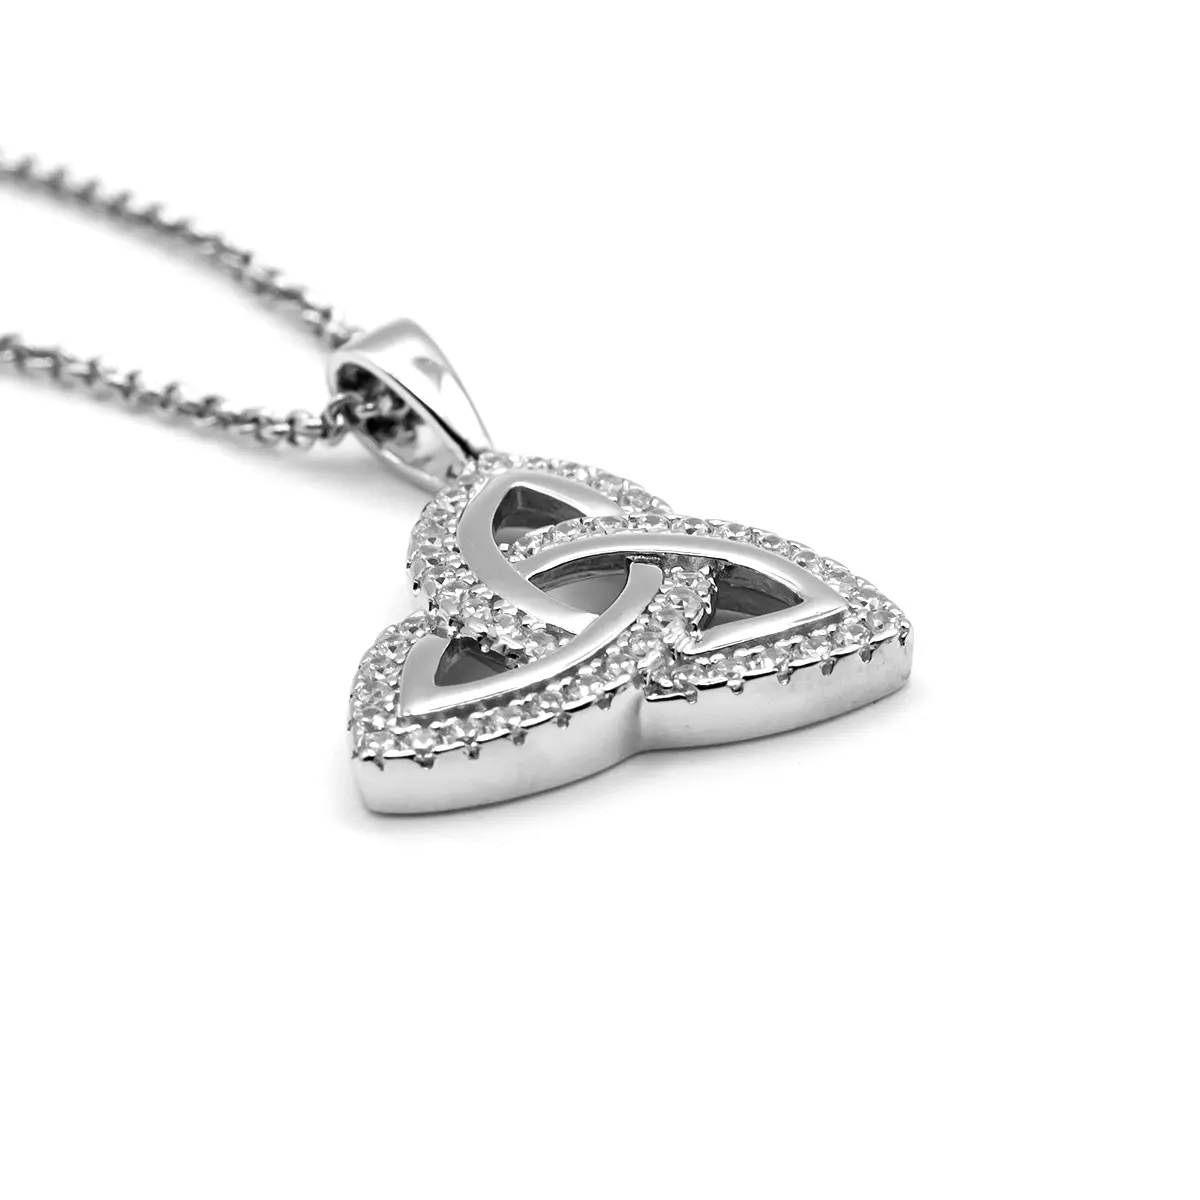 Sterling Silver Trinity Knot Pendant Inlaid With Cubic Zirconia Gemsto...